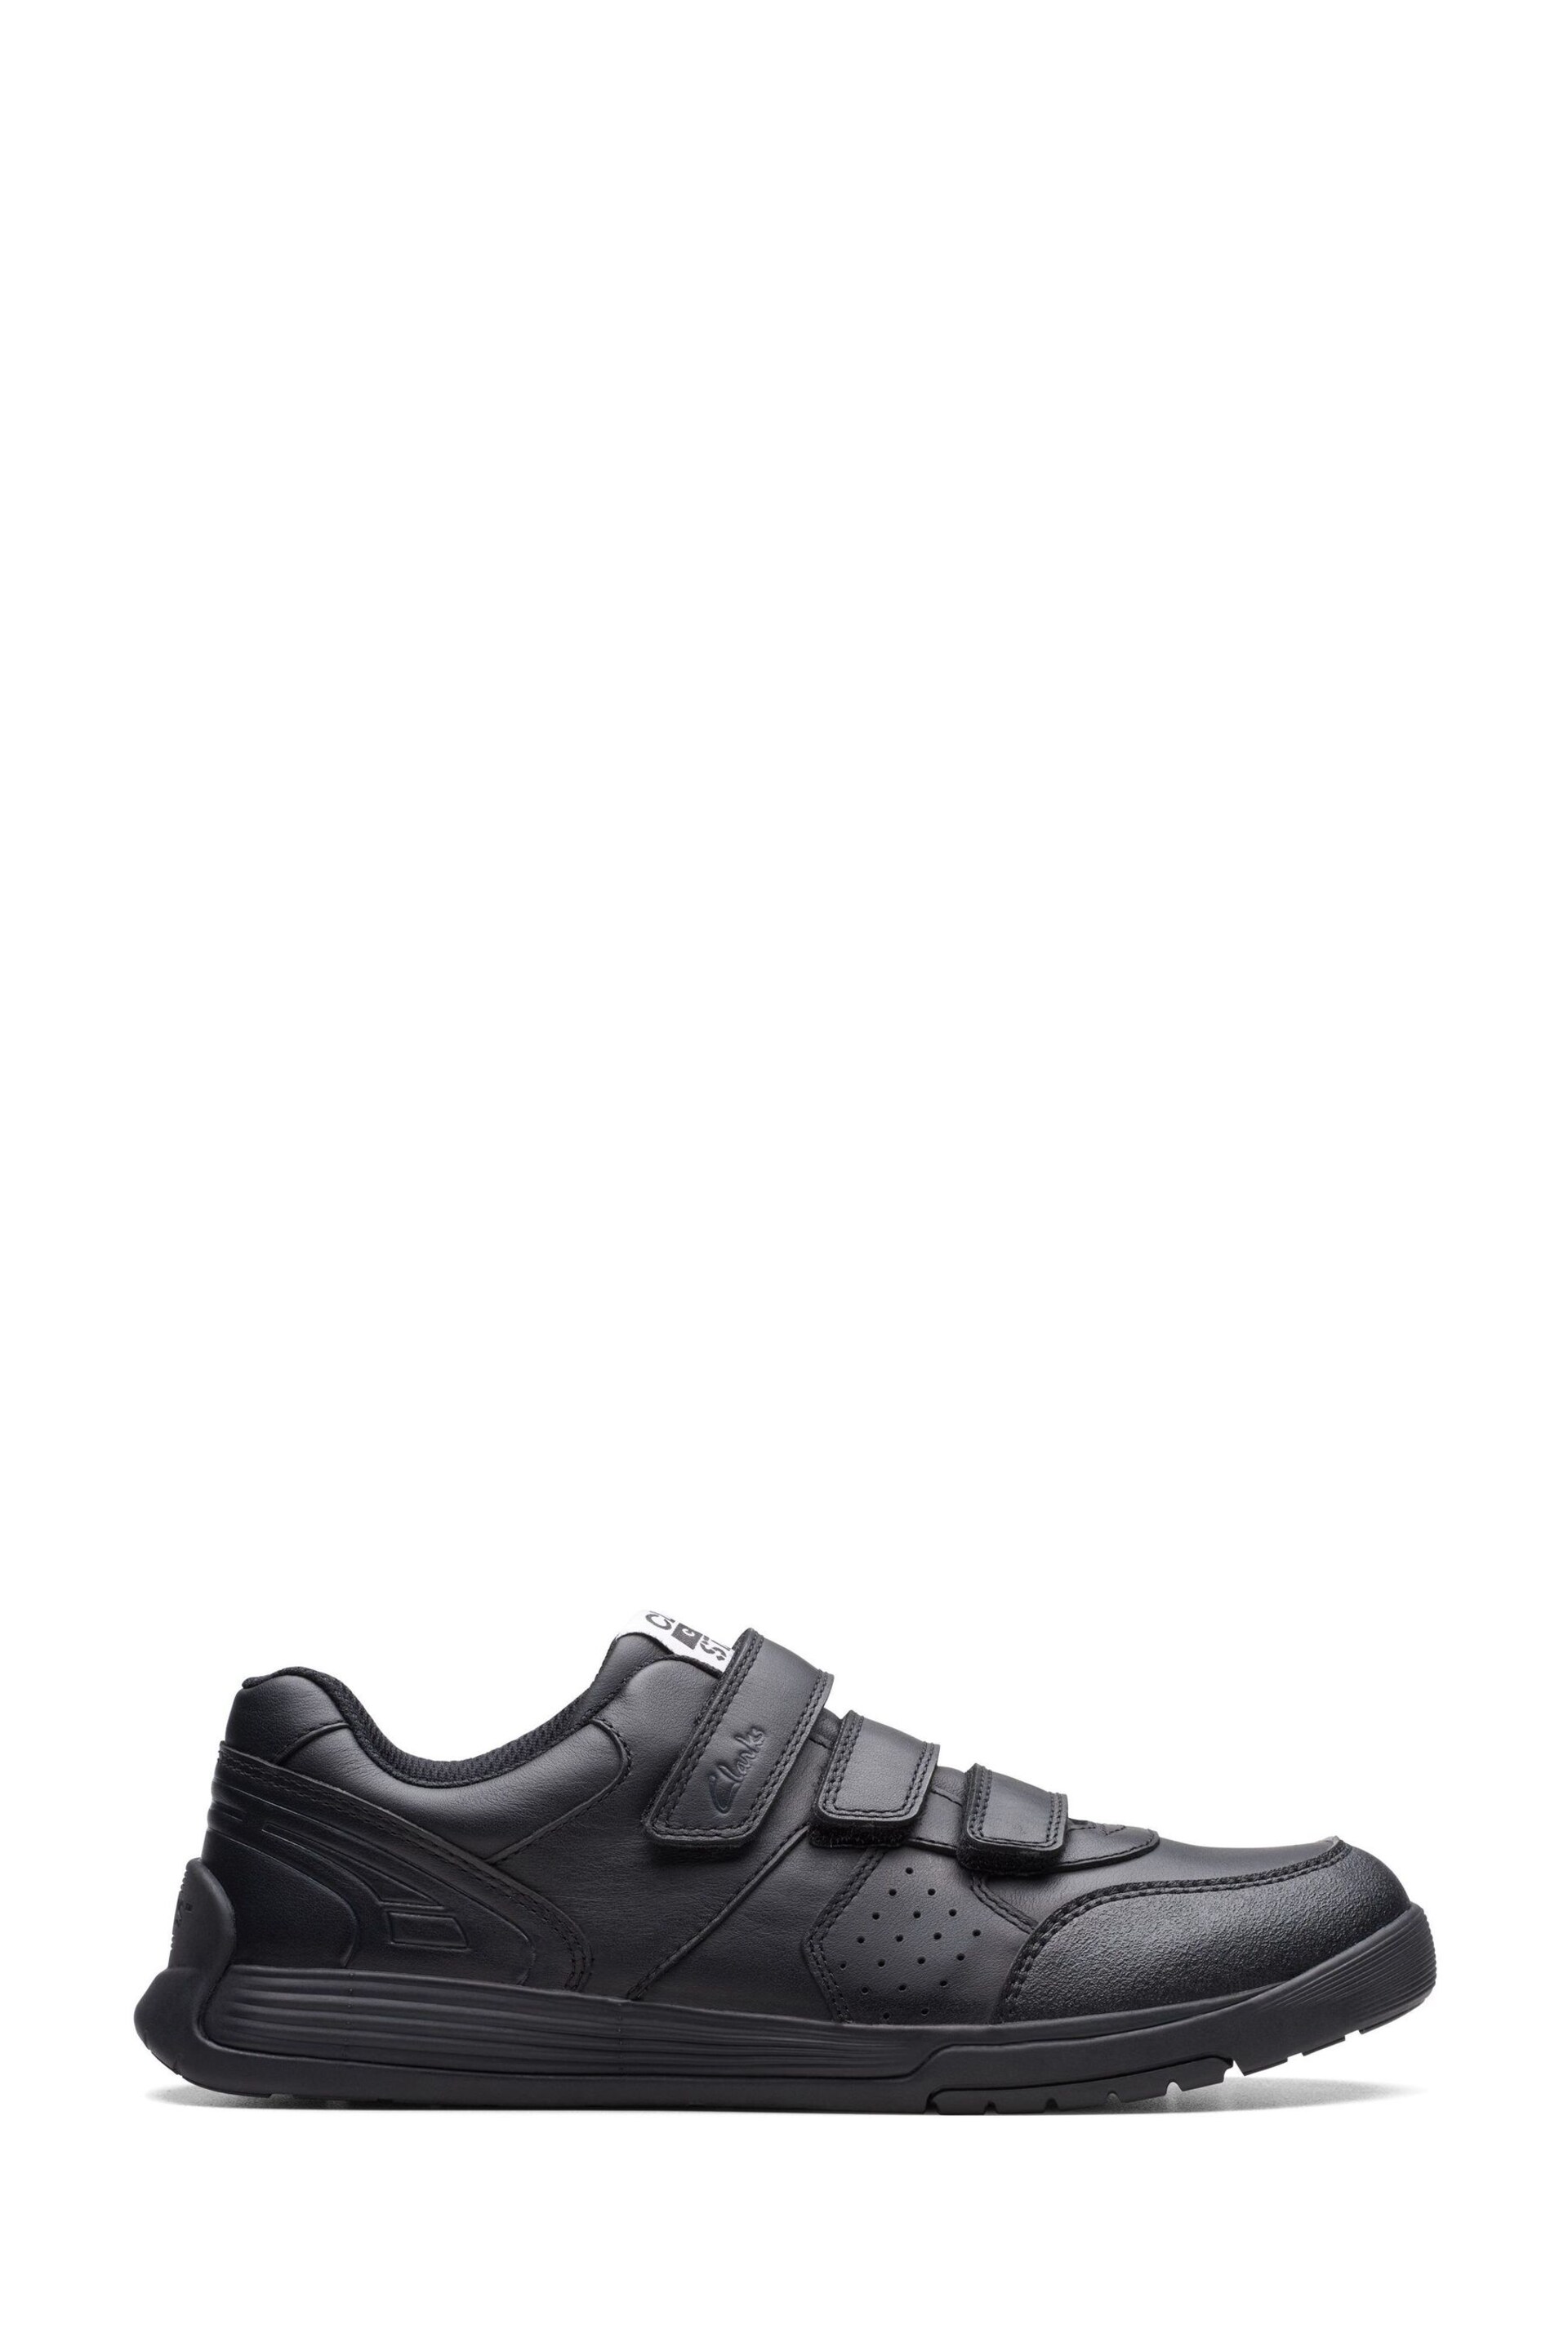 Clarks Black Multi Fit Cica Star Orb Trainers - Image 1 of 7